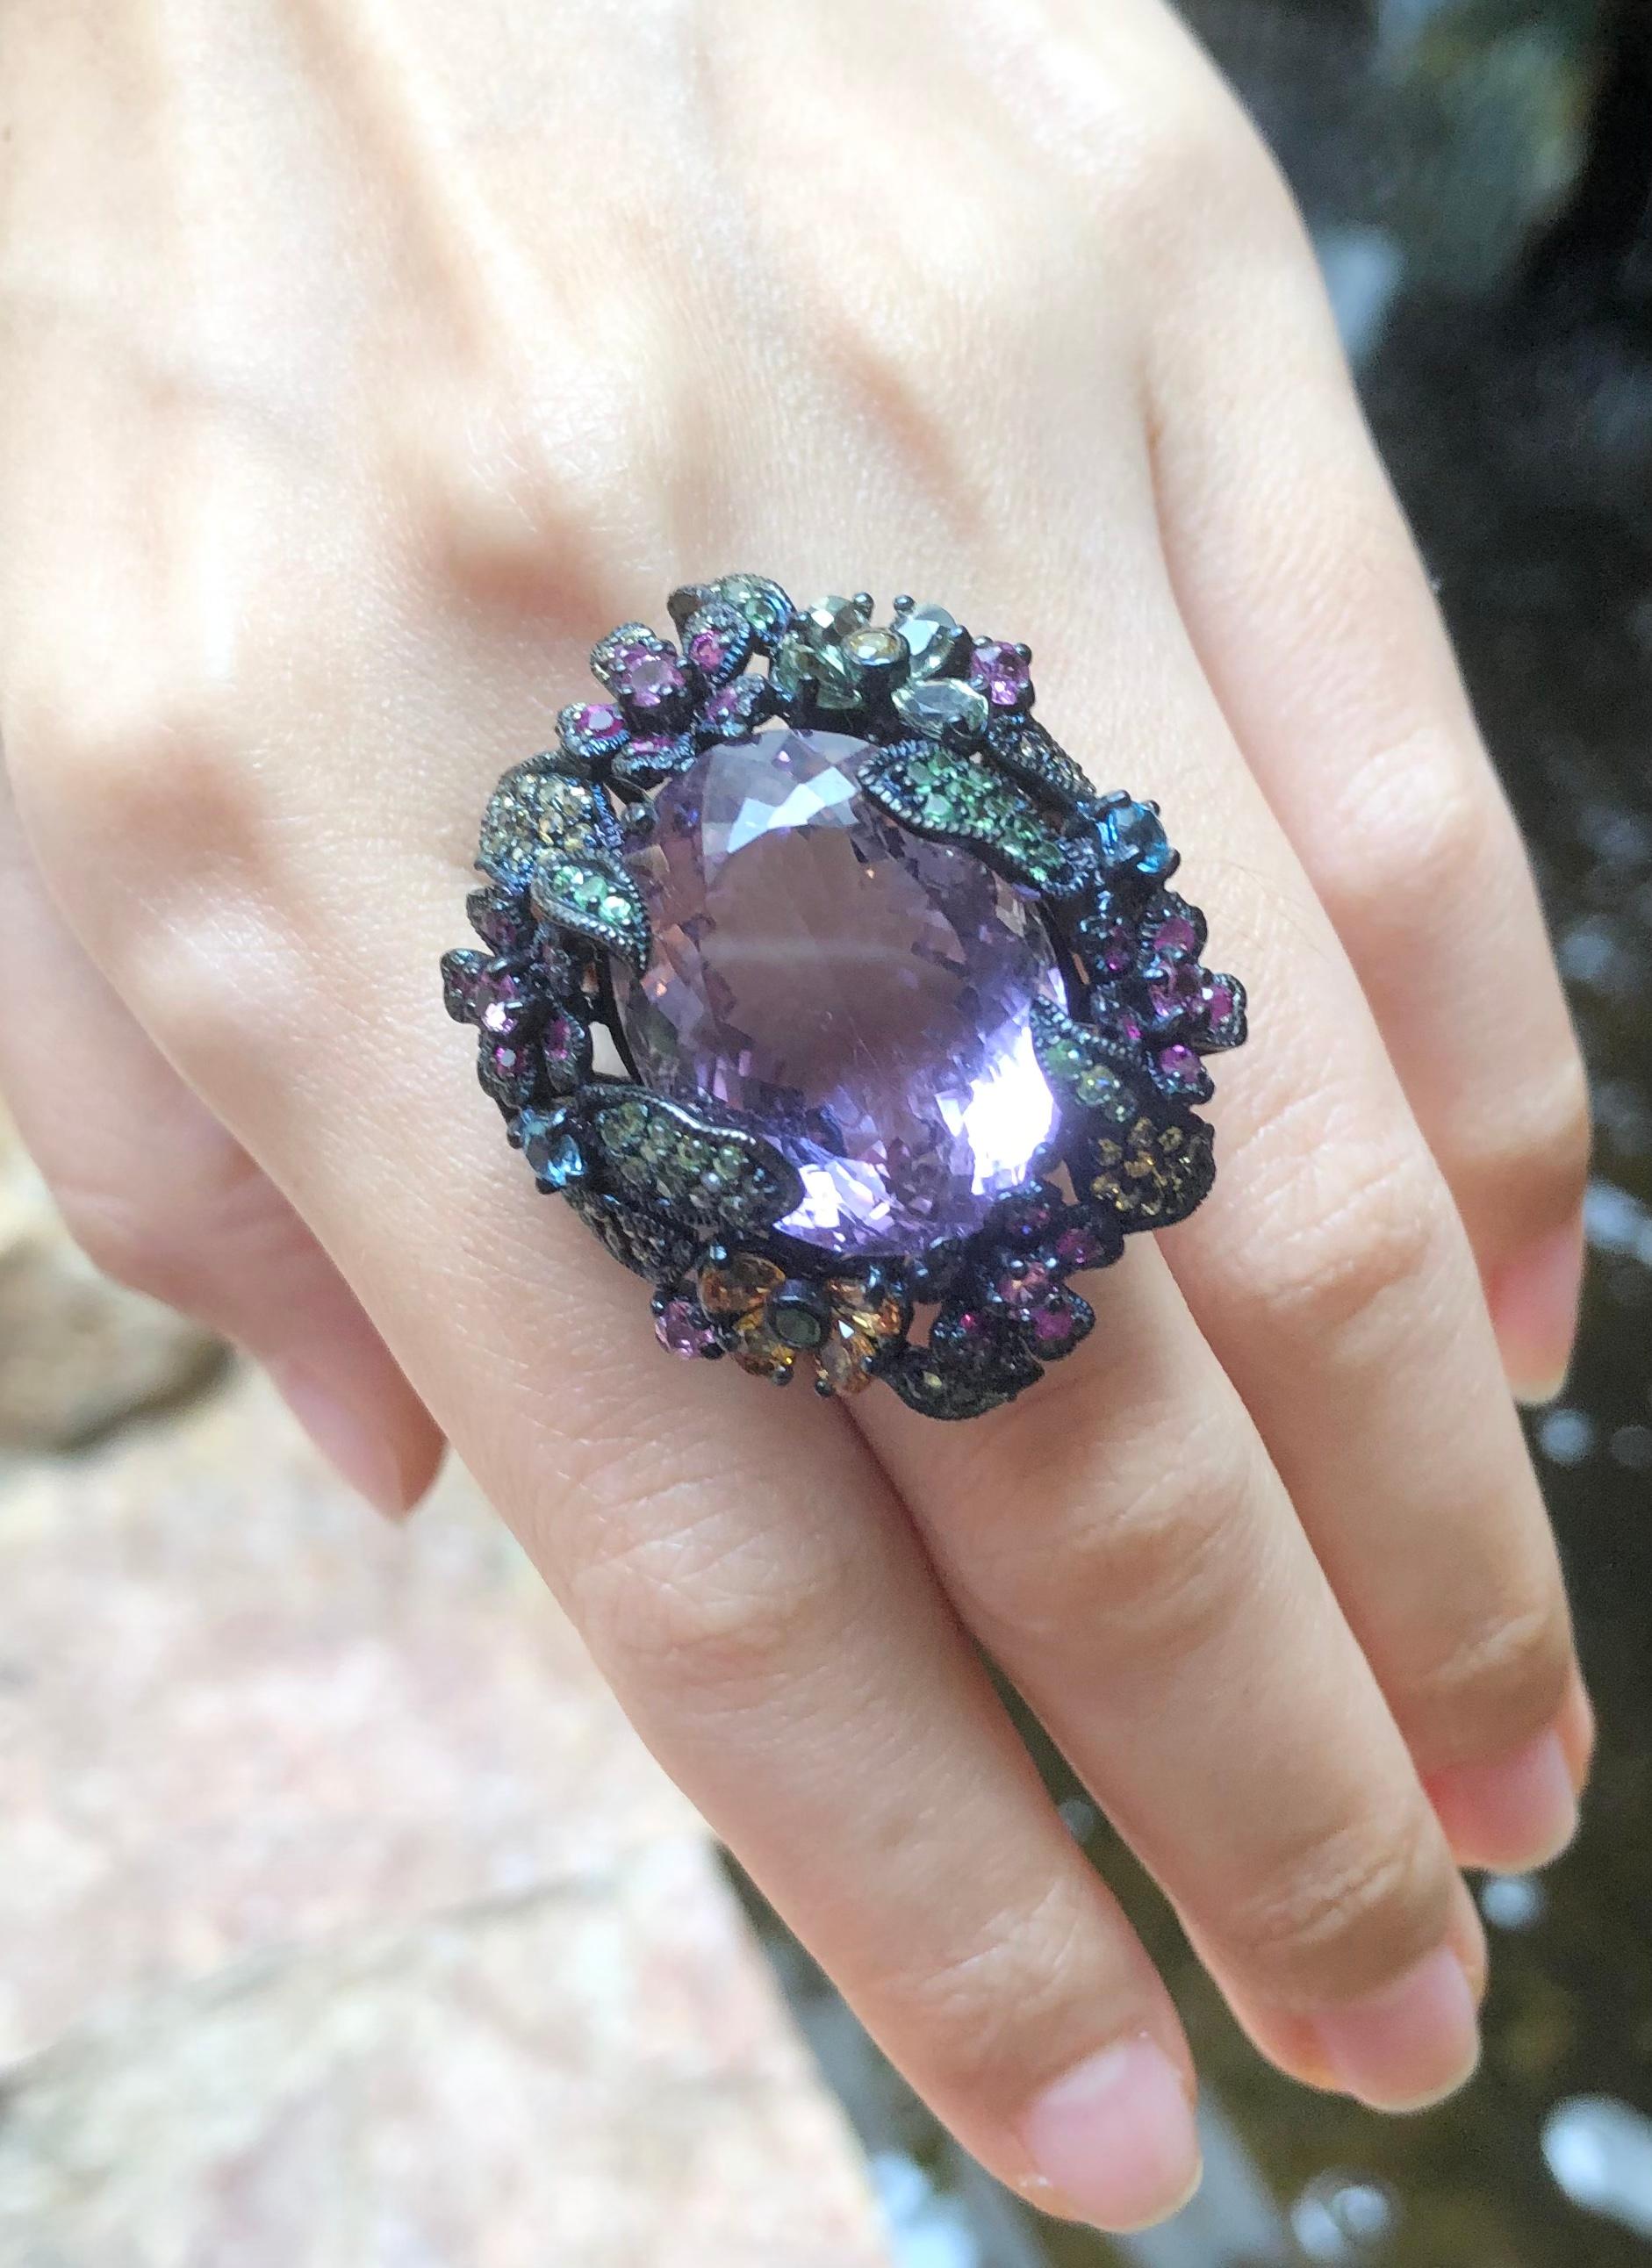 Amethyst and Multi-Color Sapphire, Tsavorite Ring set in Silver Settings

Width:  4.0 cm 
Length: 3.5 cm
Ring Size: 54
Total Weight: 22.71 grams

*Please note that the silver setting is plated with rhodium to promote shine and help prevent